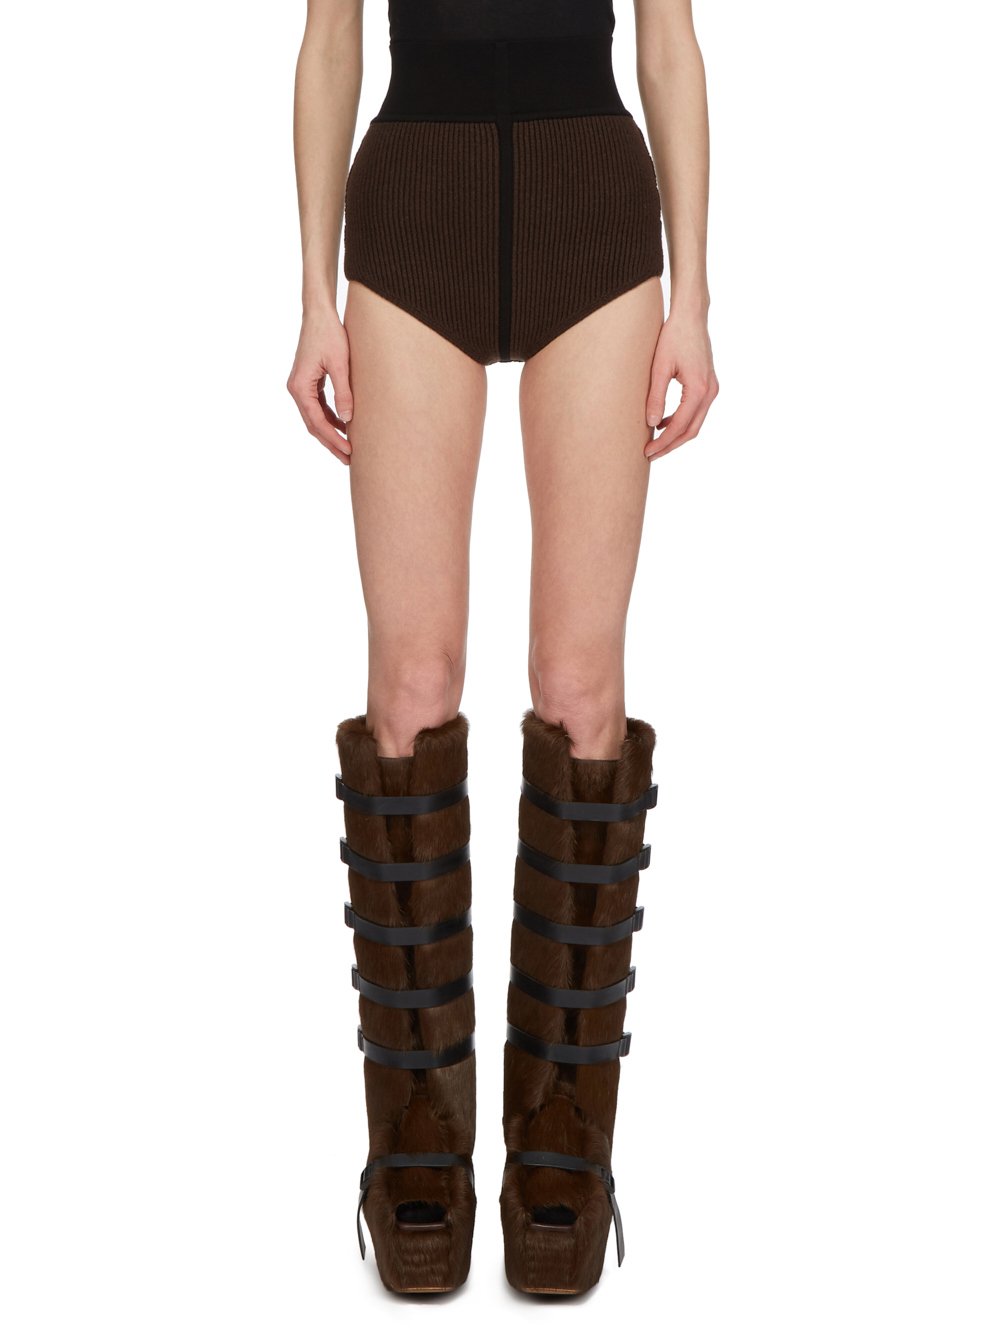 RICK OWENS FW23 LUXOR RUNWAY DIRT PANTIES IN BROWN AND BLACK HEAVY RIB RECYCLED CASHMERE